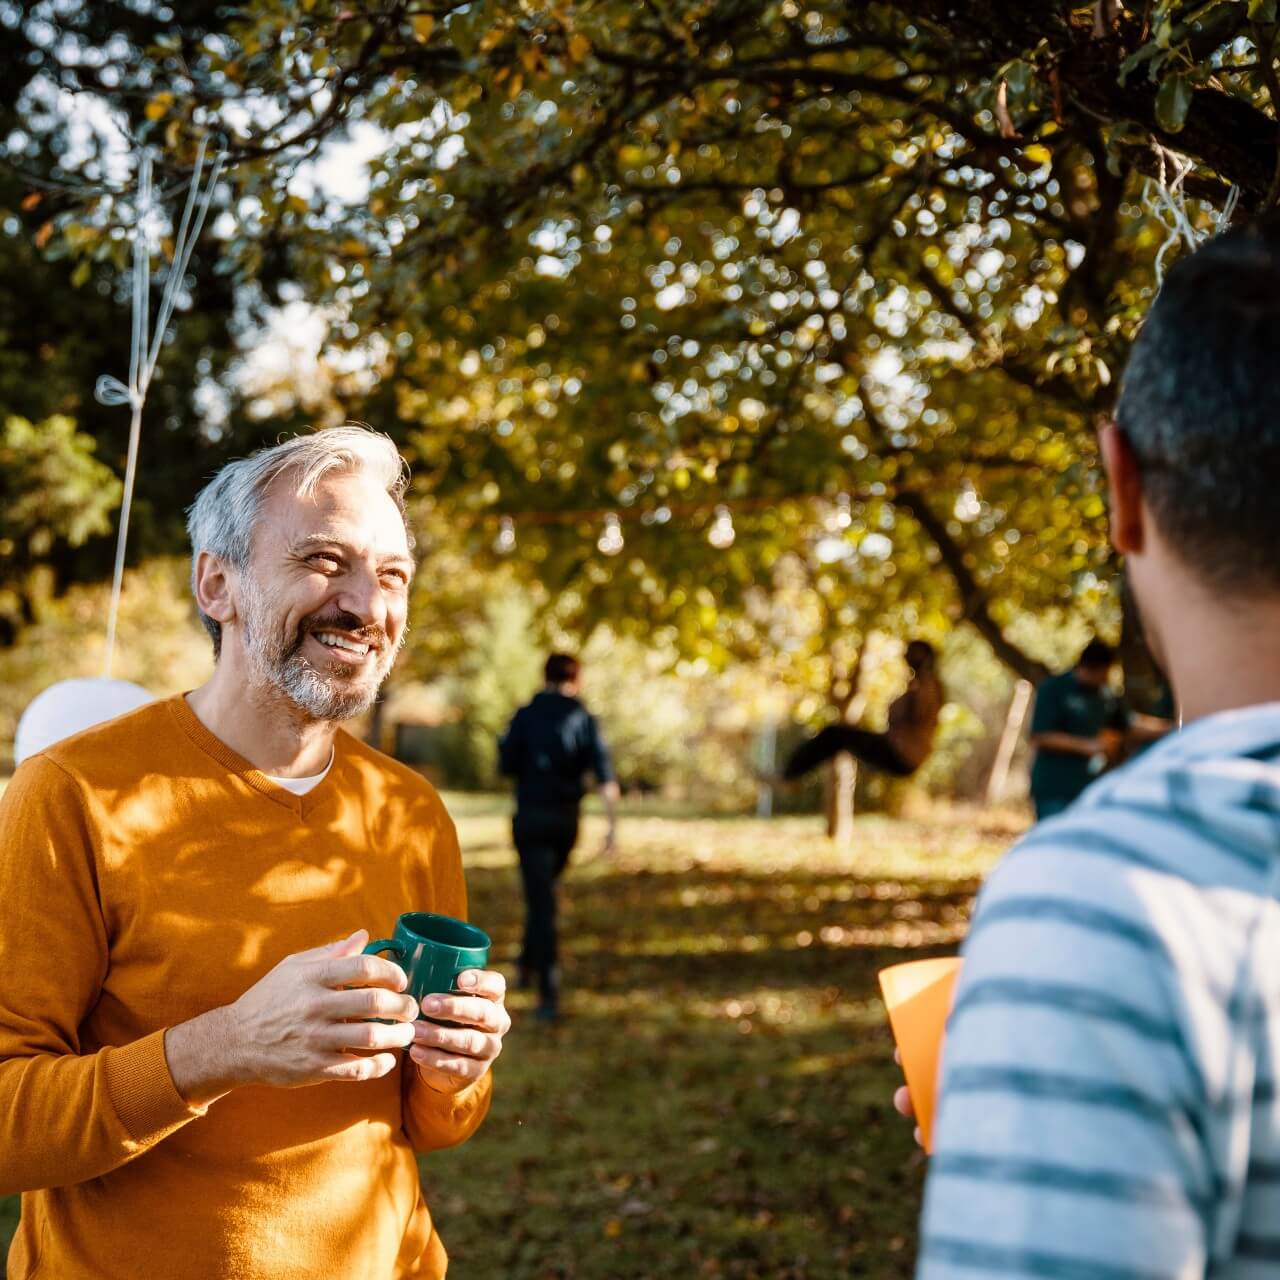 Man in a orange tshirt smiling in a park talking to his friends